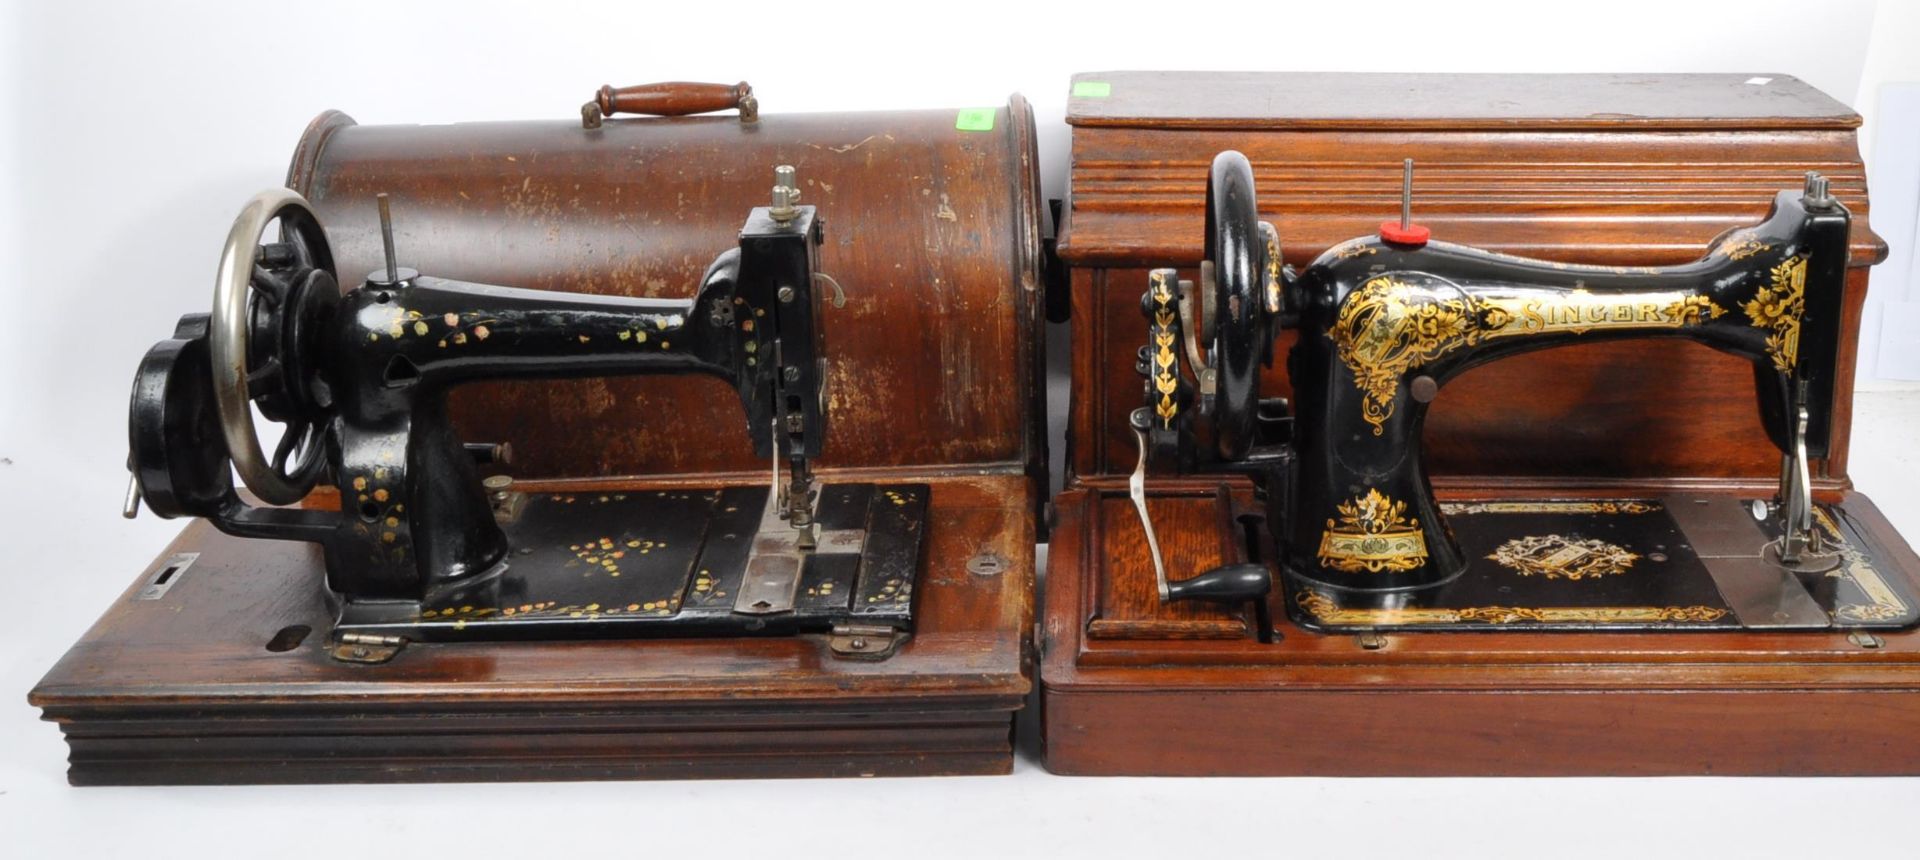 TWO EARLY 20TH CENTURY SEWING MACHINES - SINGER - Image 2 of 8